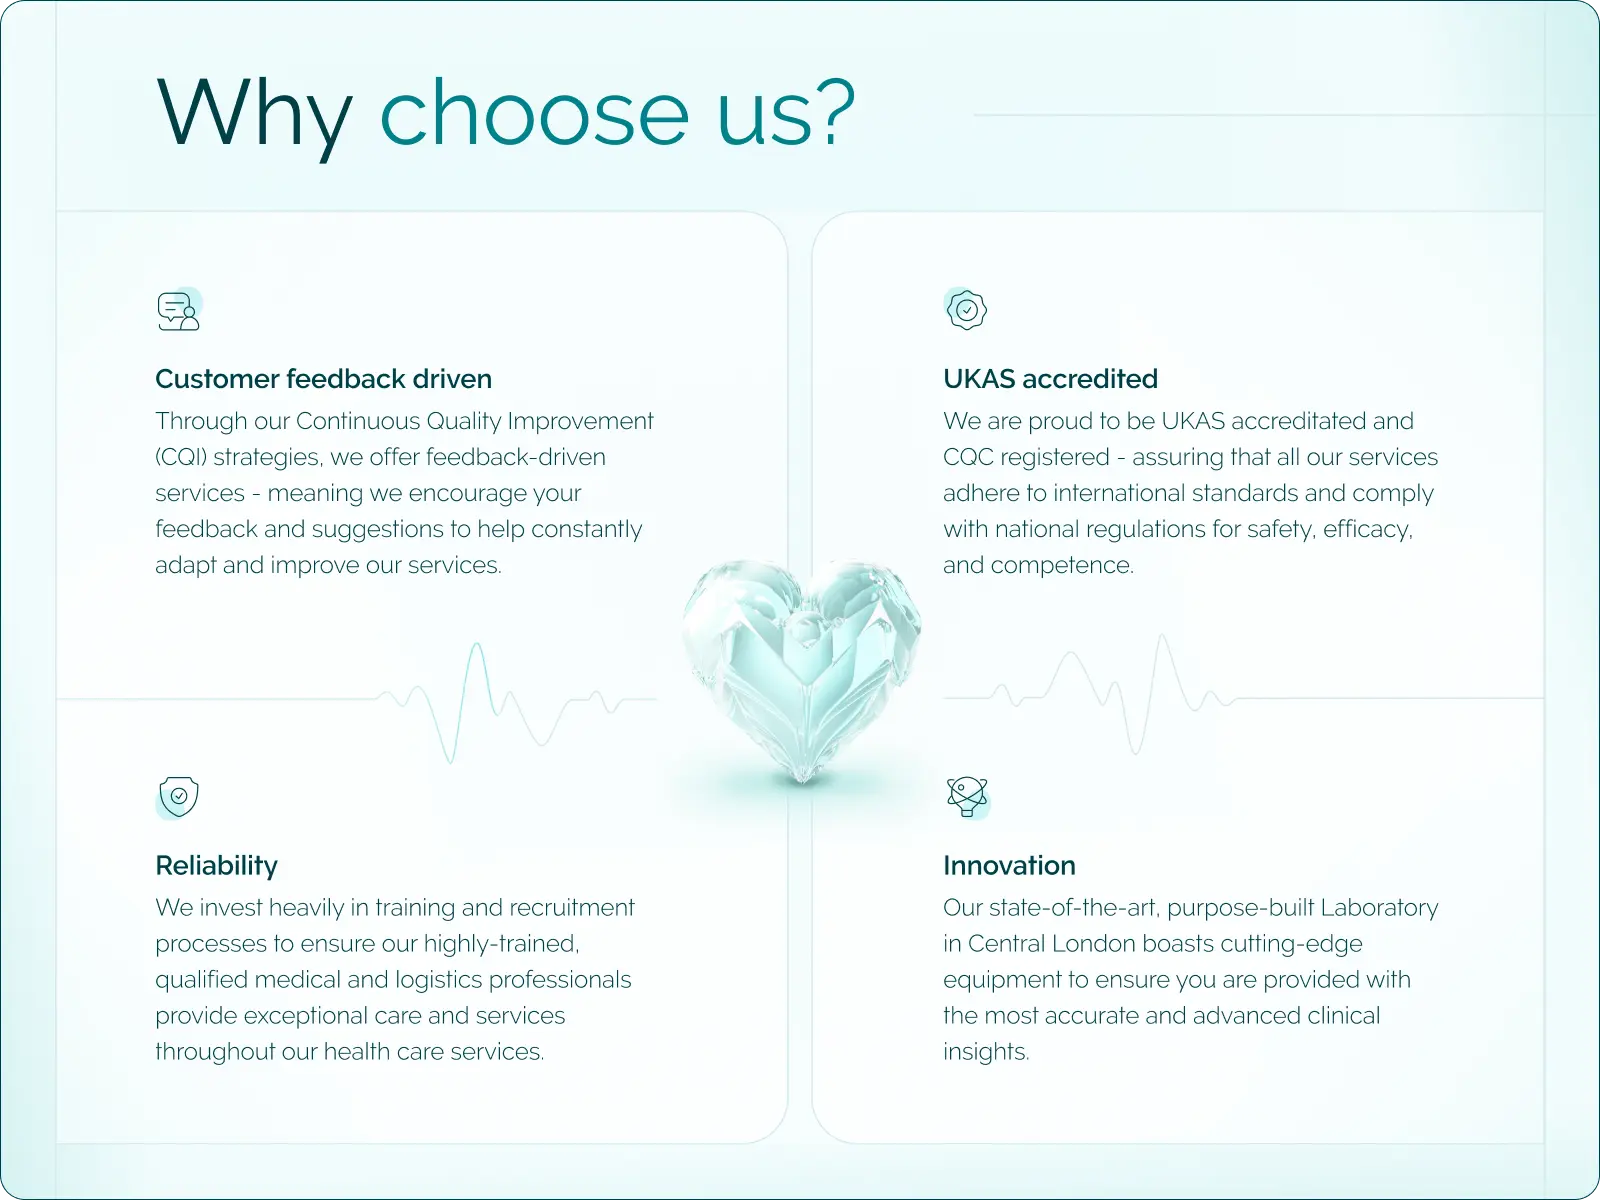 Design of the "Why choose us" website. In the middle there is a glass heart with ECG lines showing the heartbeat. There are 4 descriptions of the company's distinguishing features: Customer feedback driven, UKAS accredited, Reliability, Innovation.